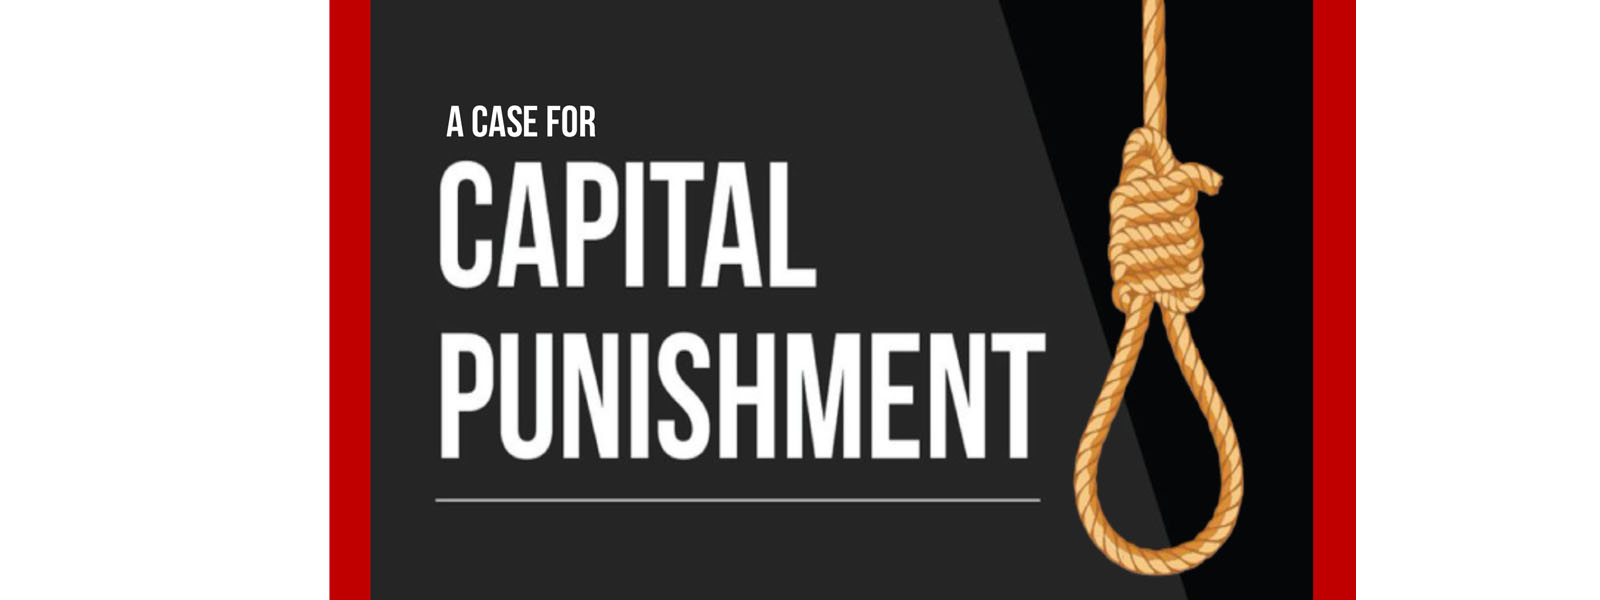 Capital punishment to people misusing public funds